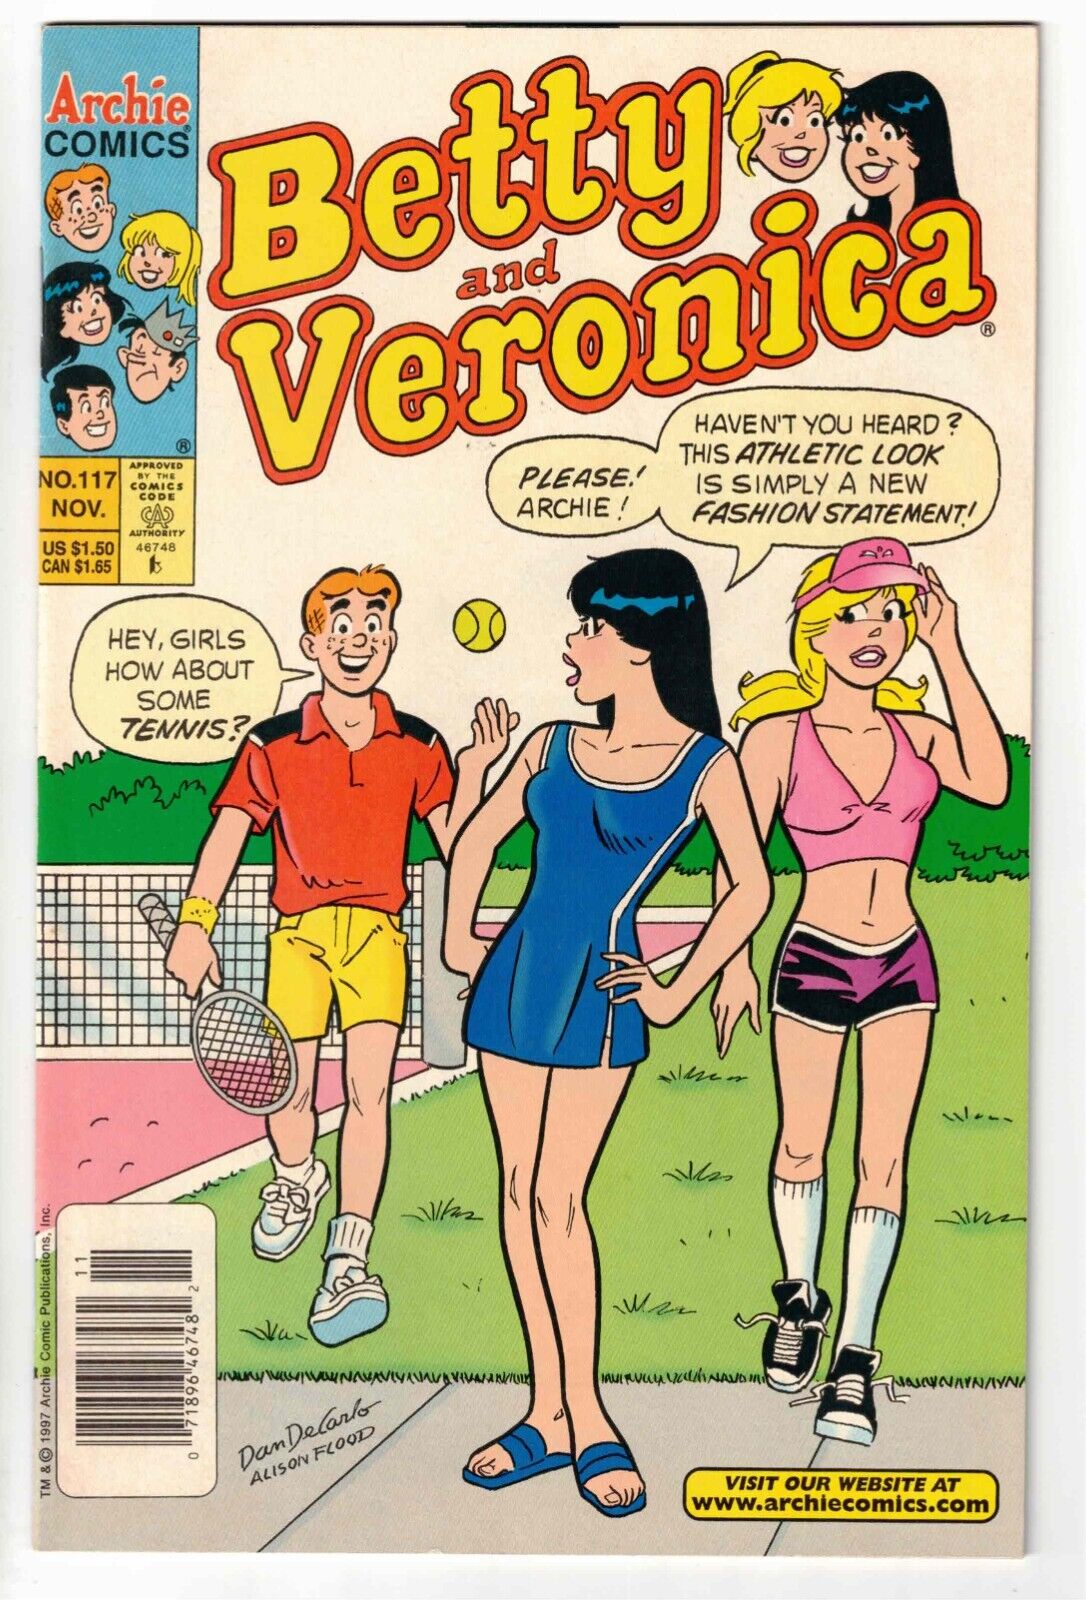 BETTY AND VERONICA #117 1997 NICE HOT LEGS CHEESECAKE COVER VFN/NM